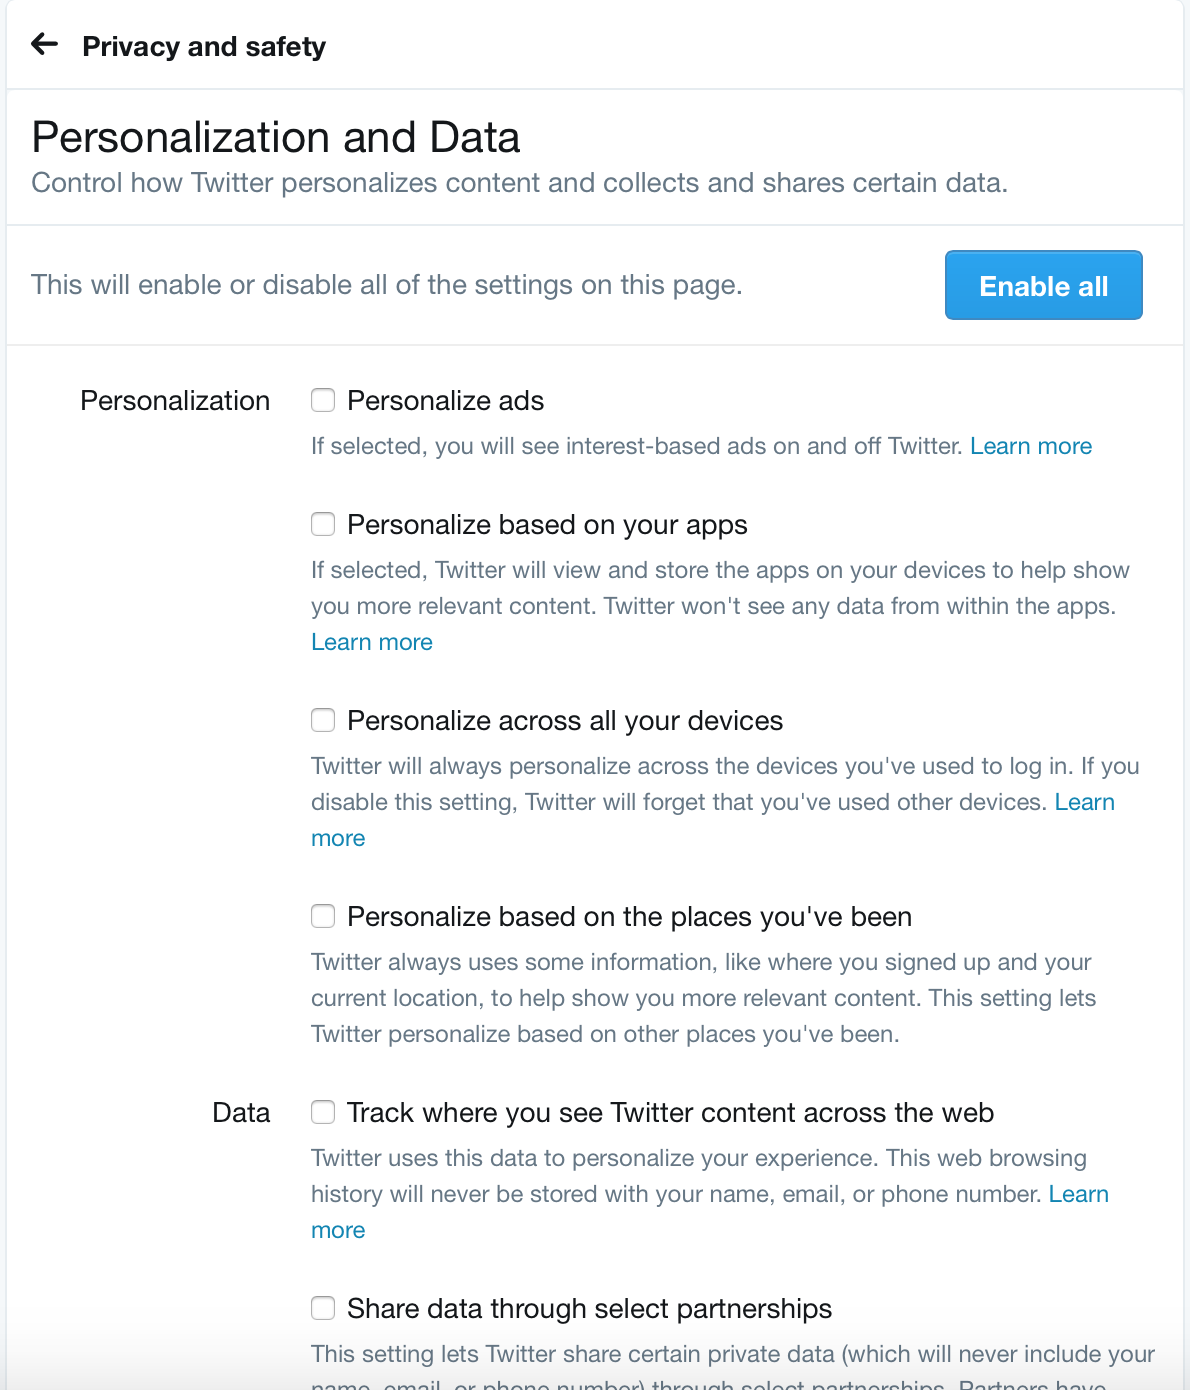 Twitter Personalization and Data choices